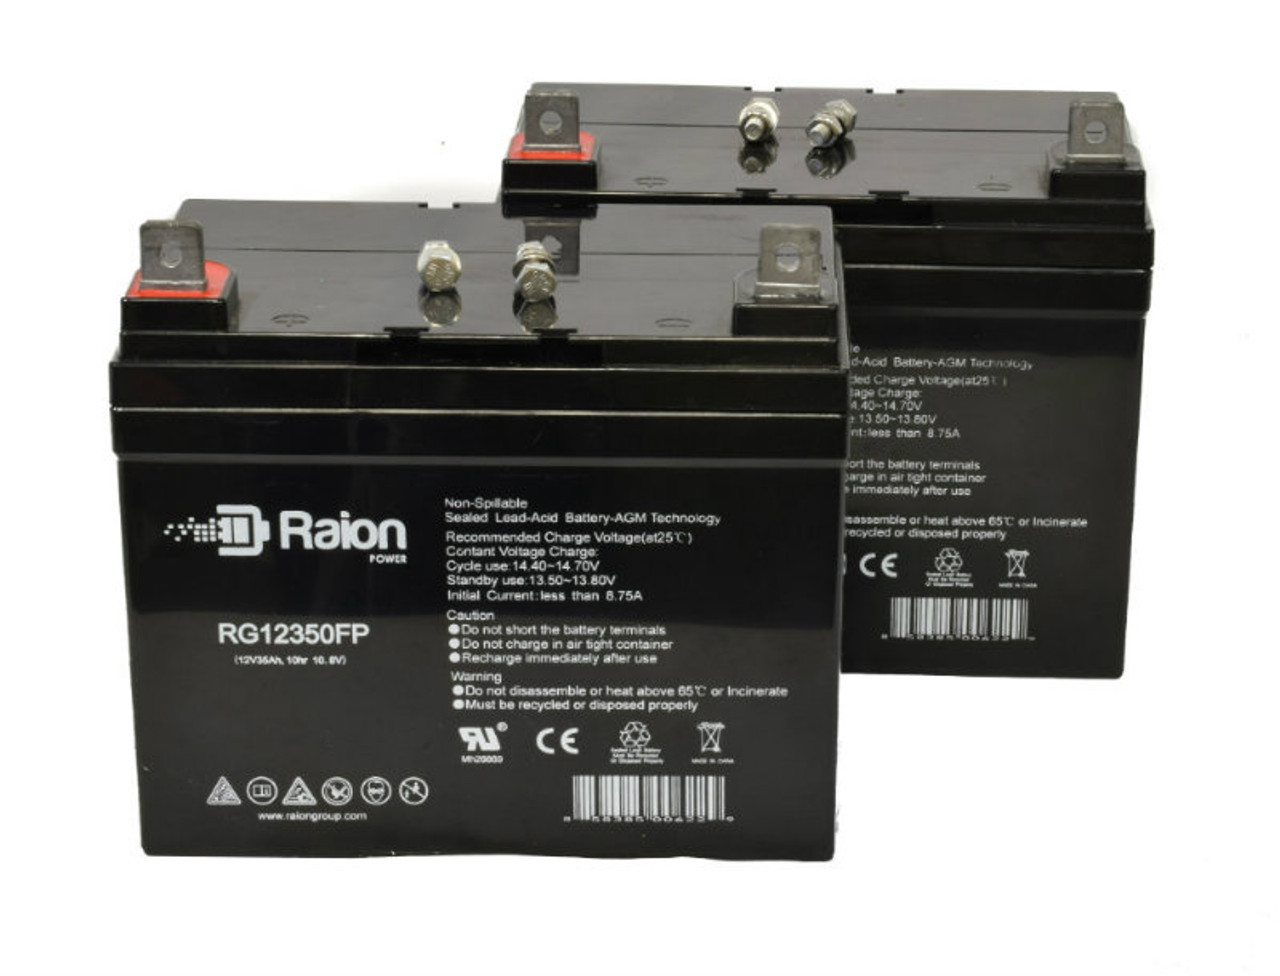 Raion Power Replacement 12V 35Ah Lawn Mower Battery for Ingersoll Equipment 5016 - 2 Pack